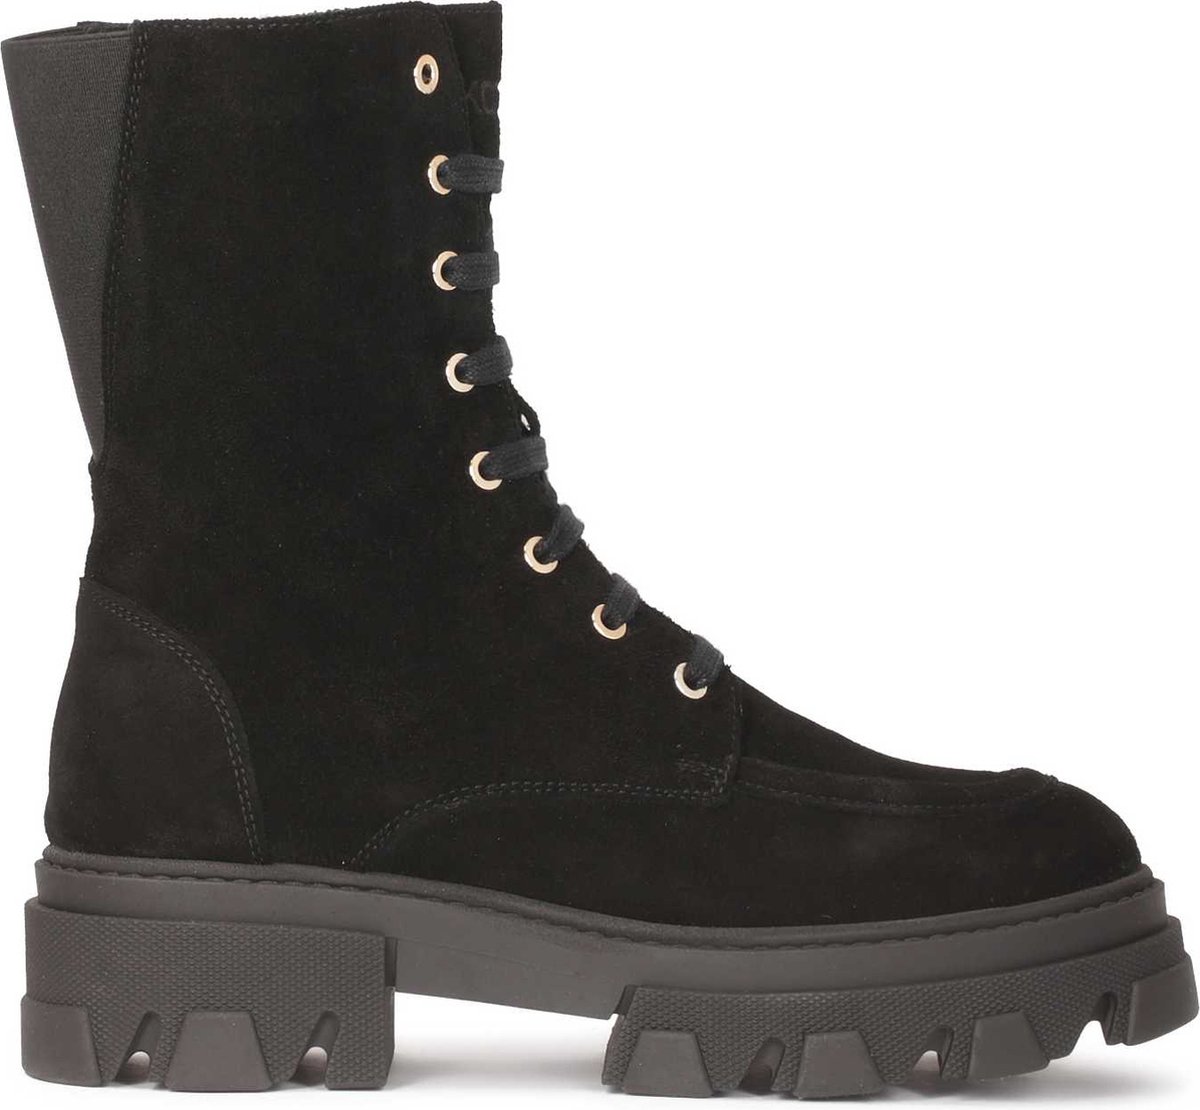 Kazar Black suede boots in military style